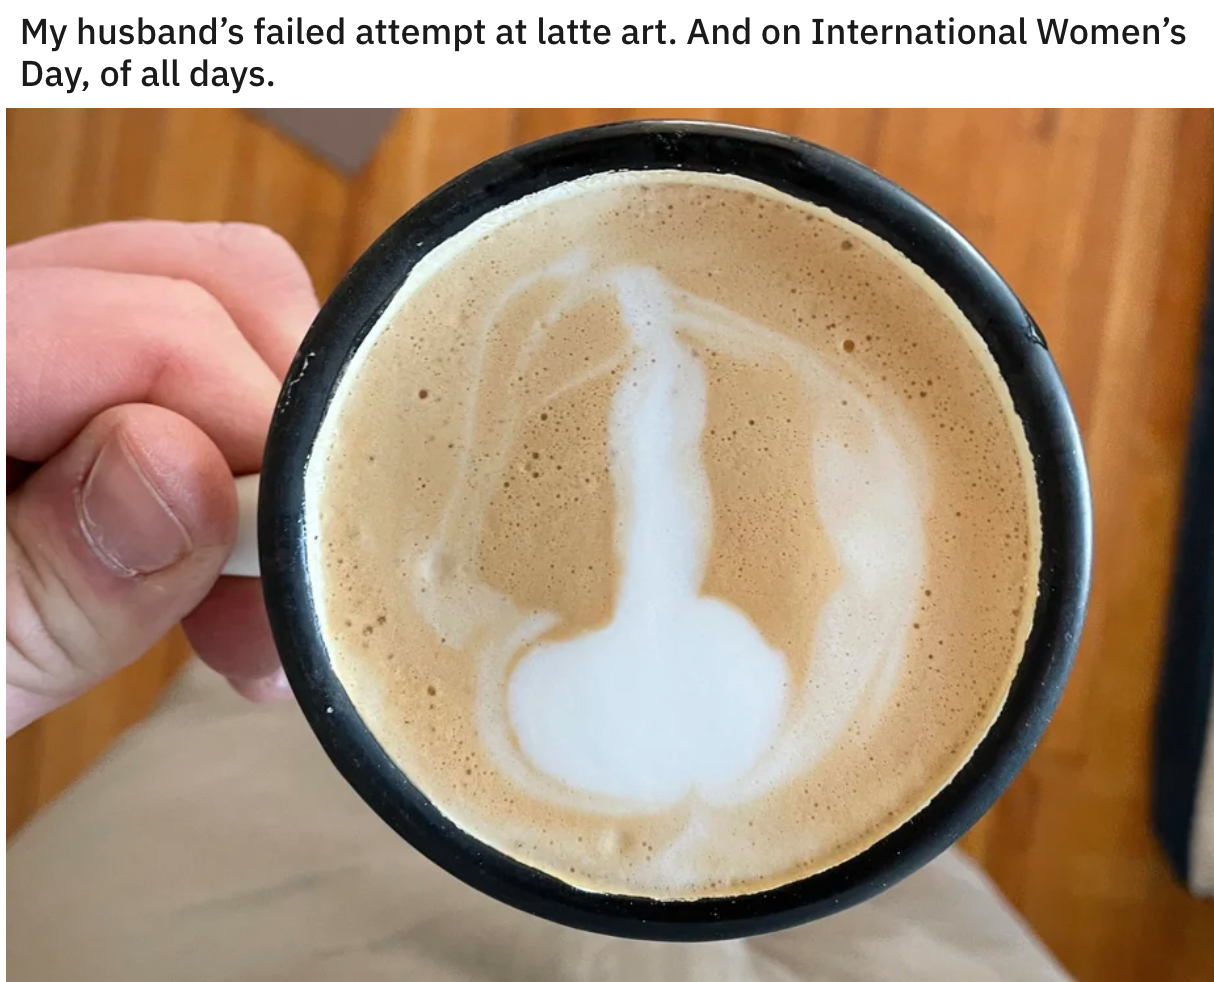 funny pics - penis latte - My husband's failed attempt at latte art. And on International Women's Day, of all days.